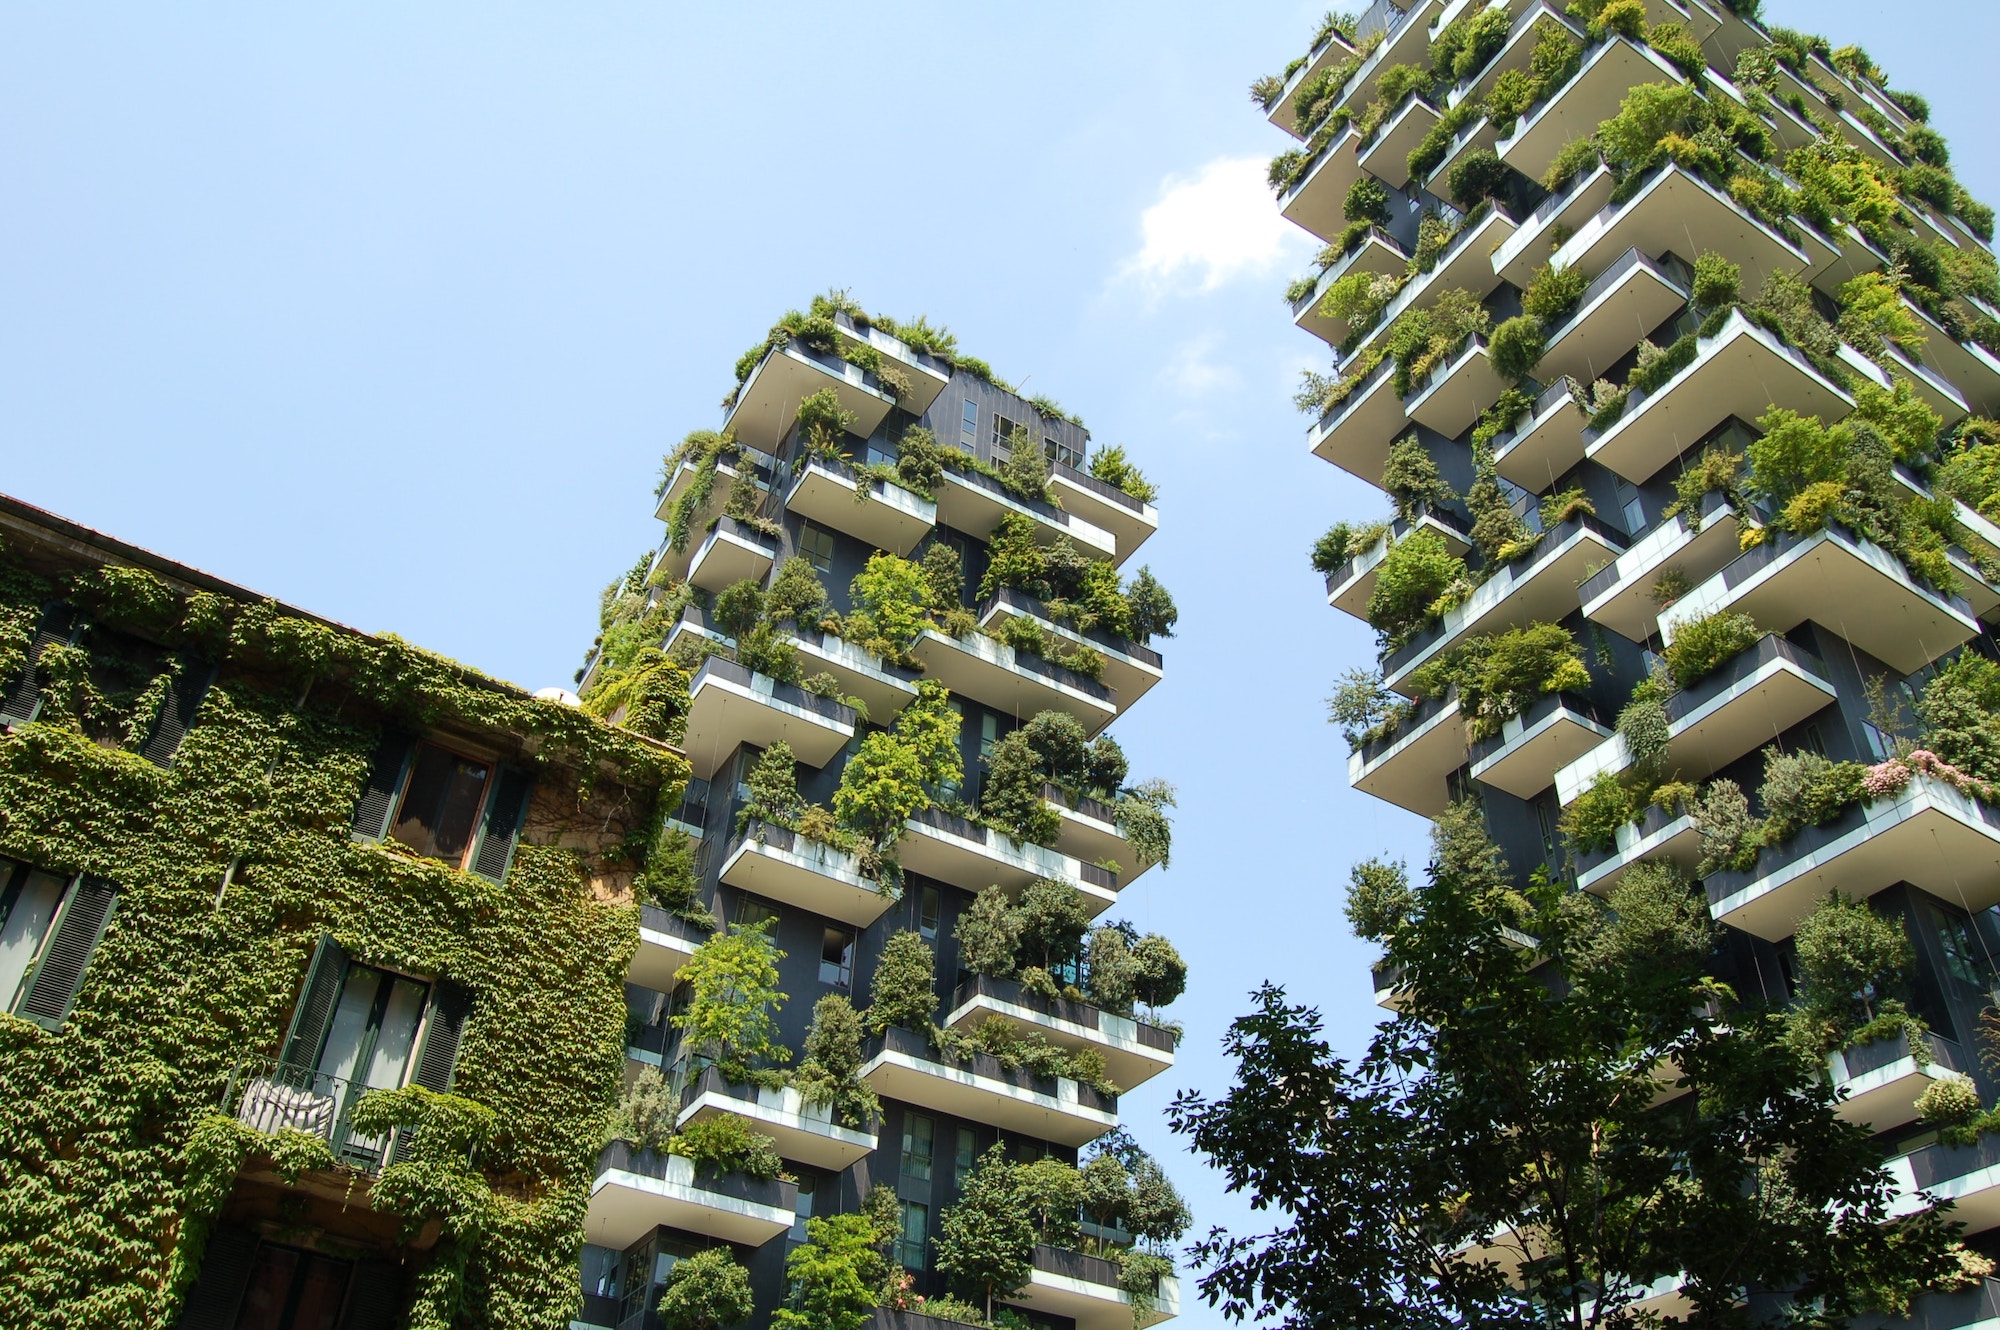 Three contemporary high-rise flats, covered in greenery and trees on every floor, set against a bright blue skyline.